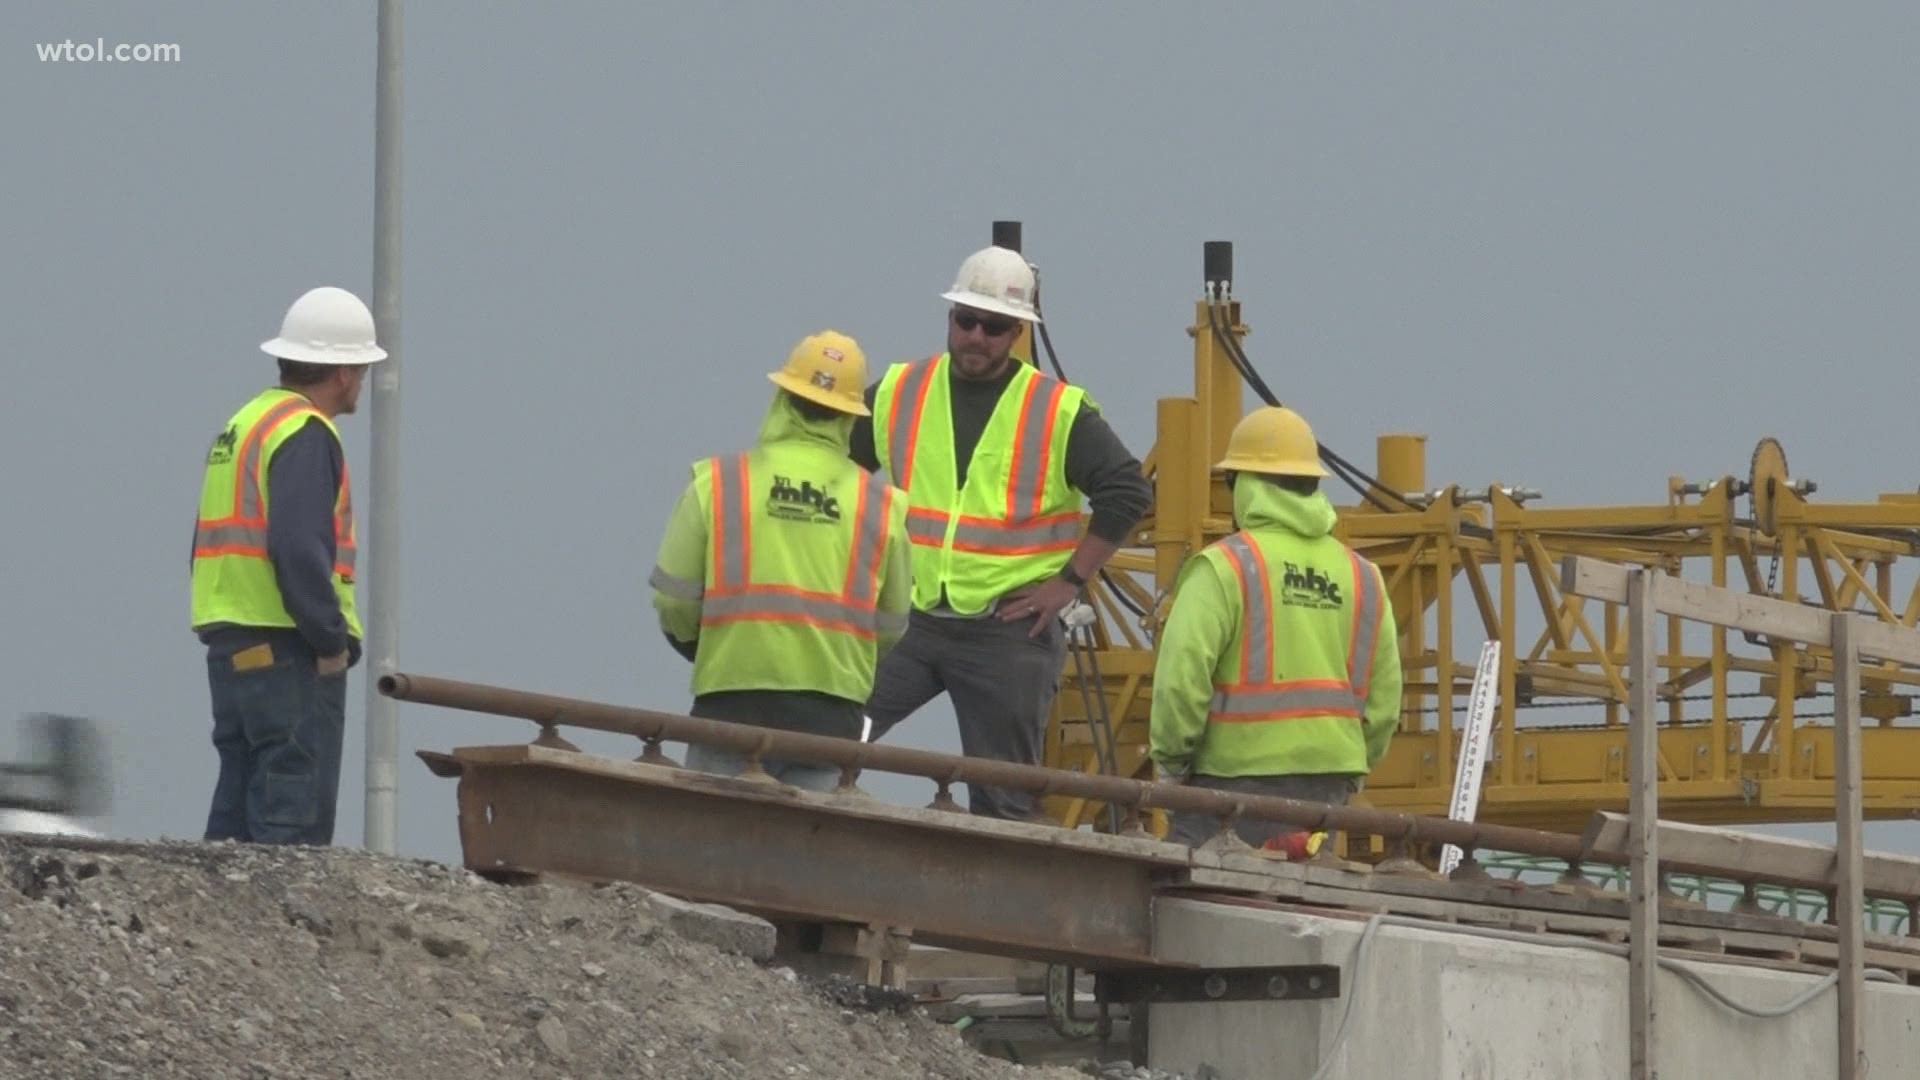 Major projects ramping up for ODOT as construction season begins. The I-475 and Dorr St. Interchange will be done before the Solheim Cup begins later this year.